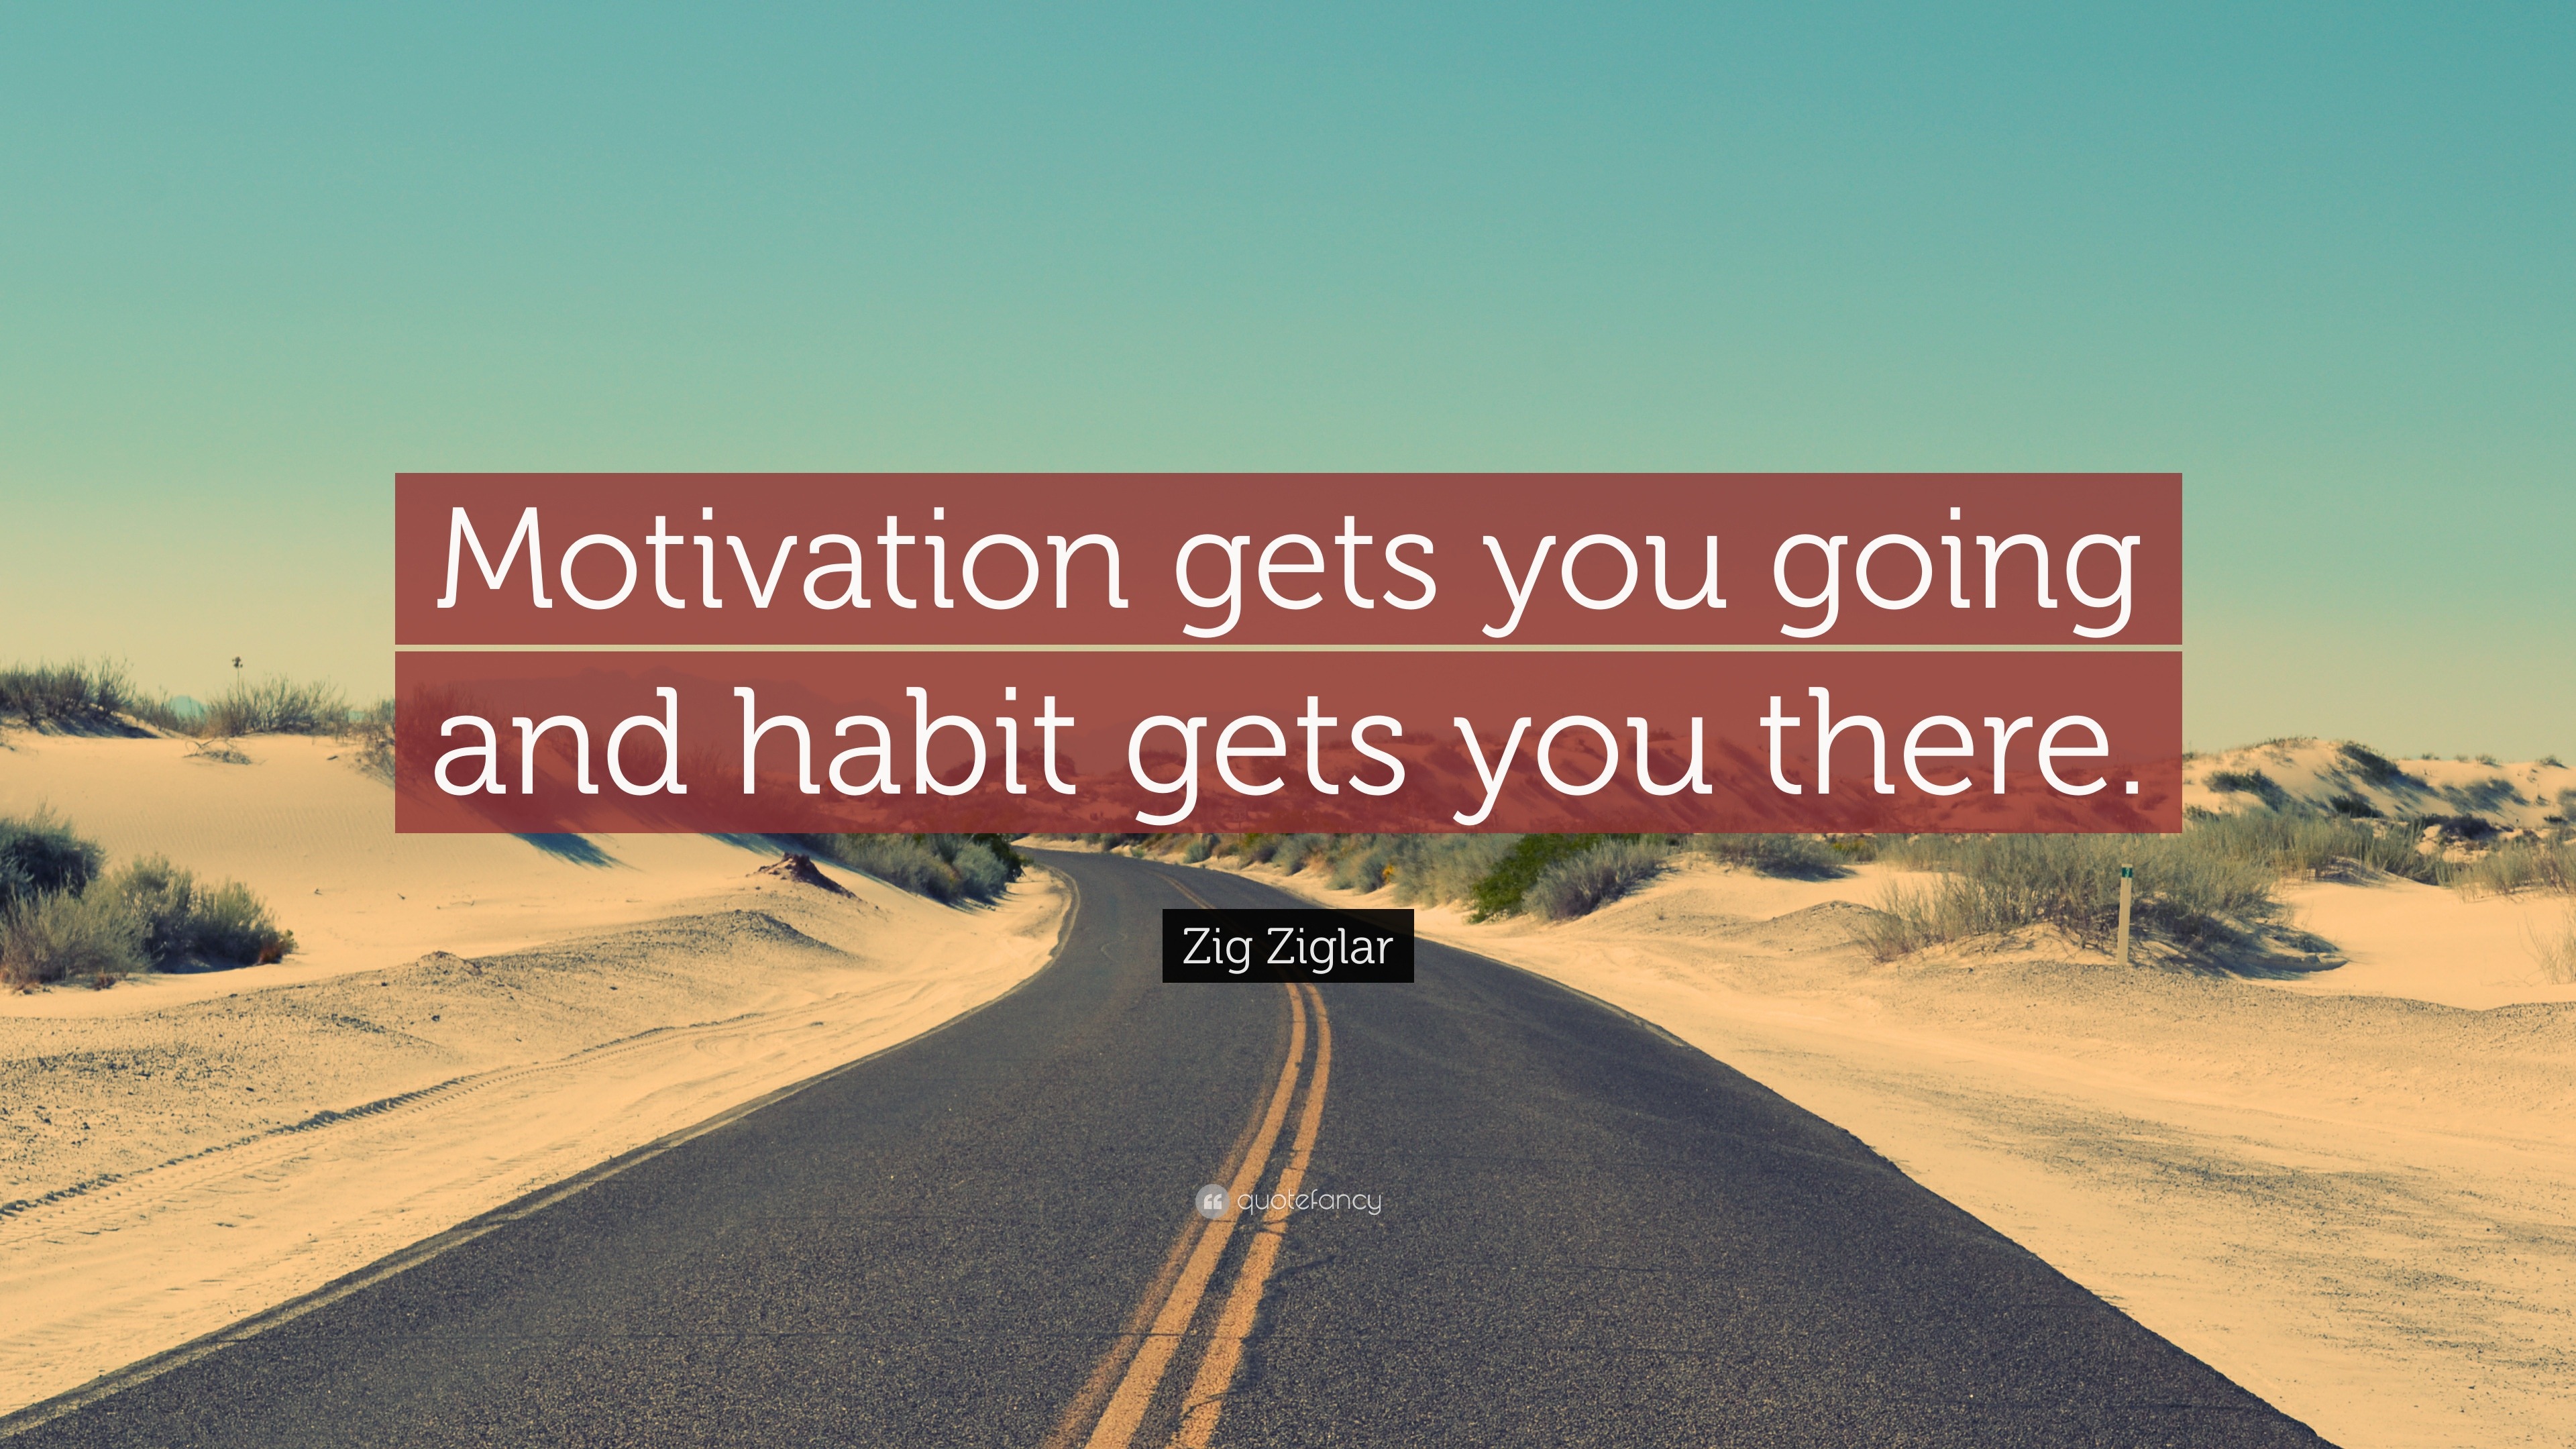 Zig Ziglar Quote: “Motivation gets you going and habit gets you there.”